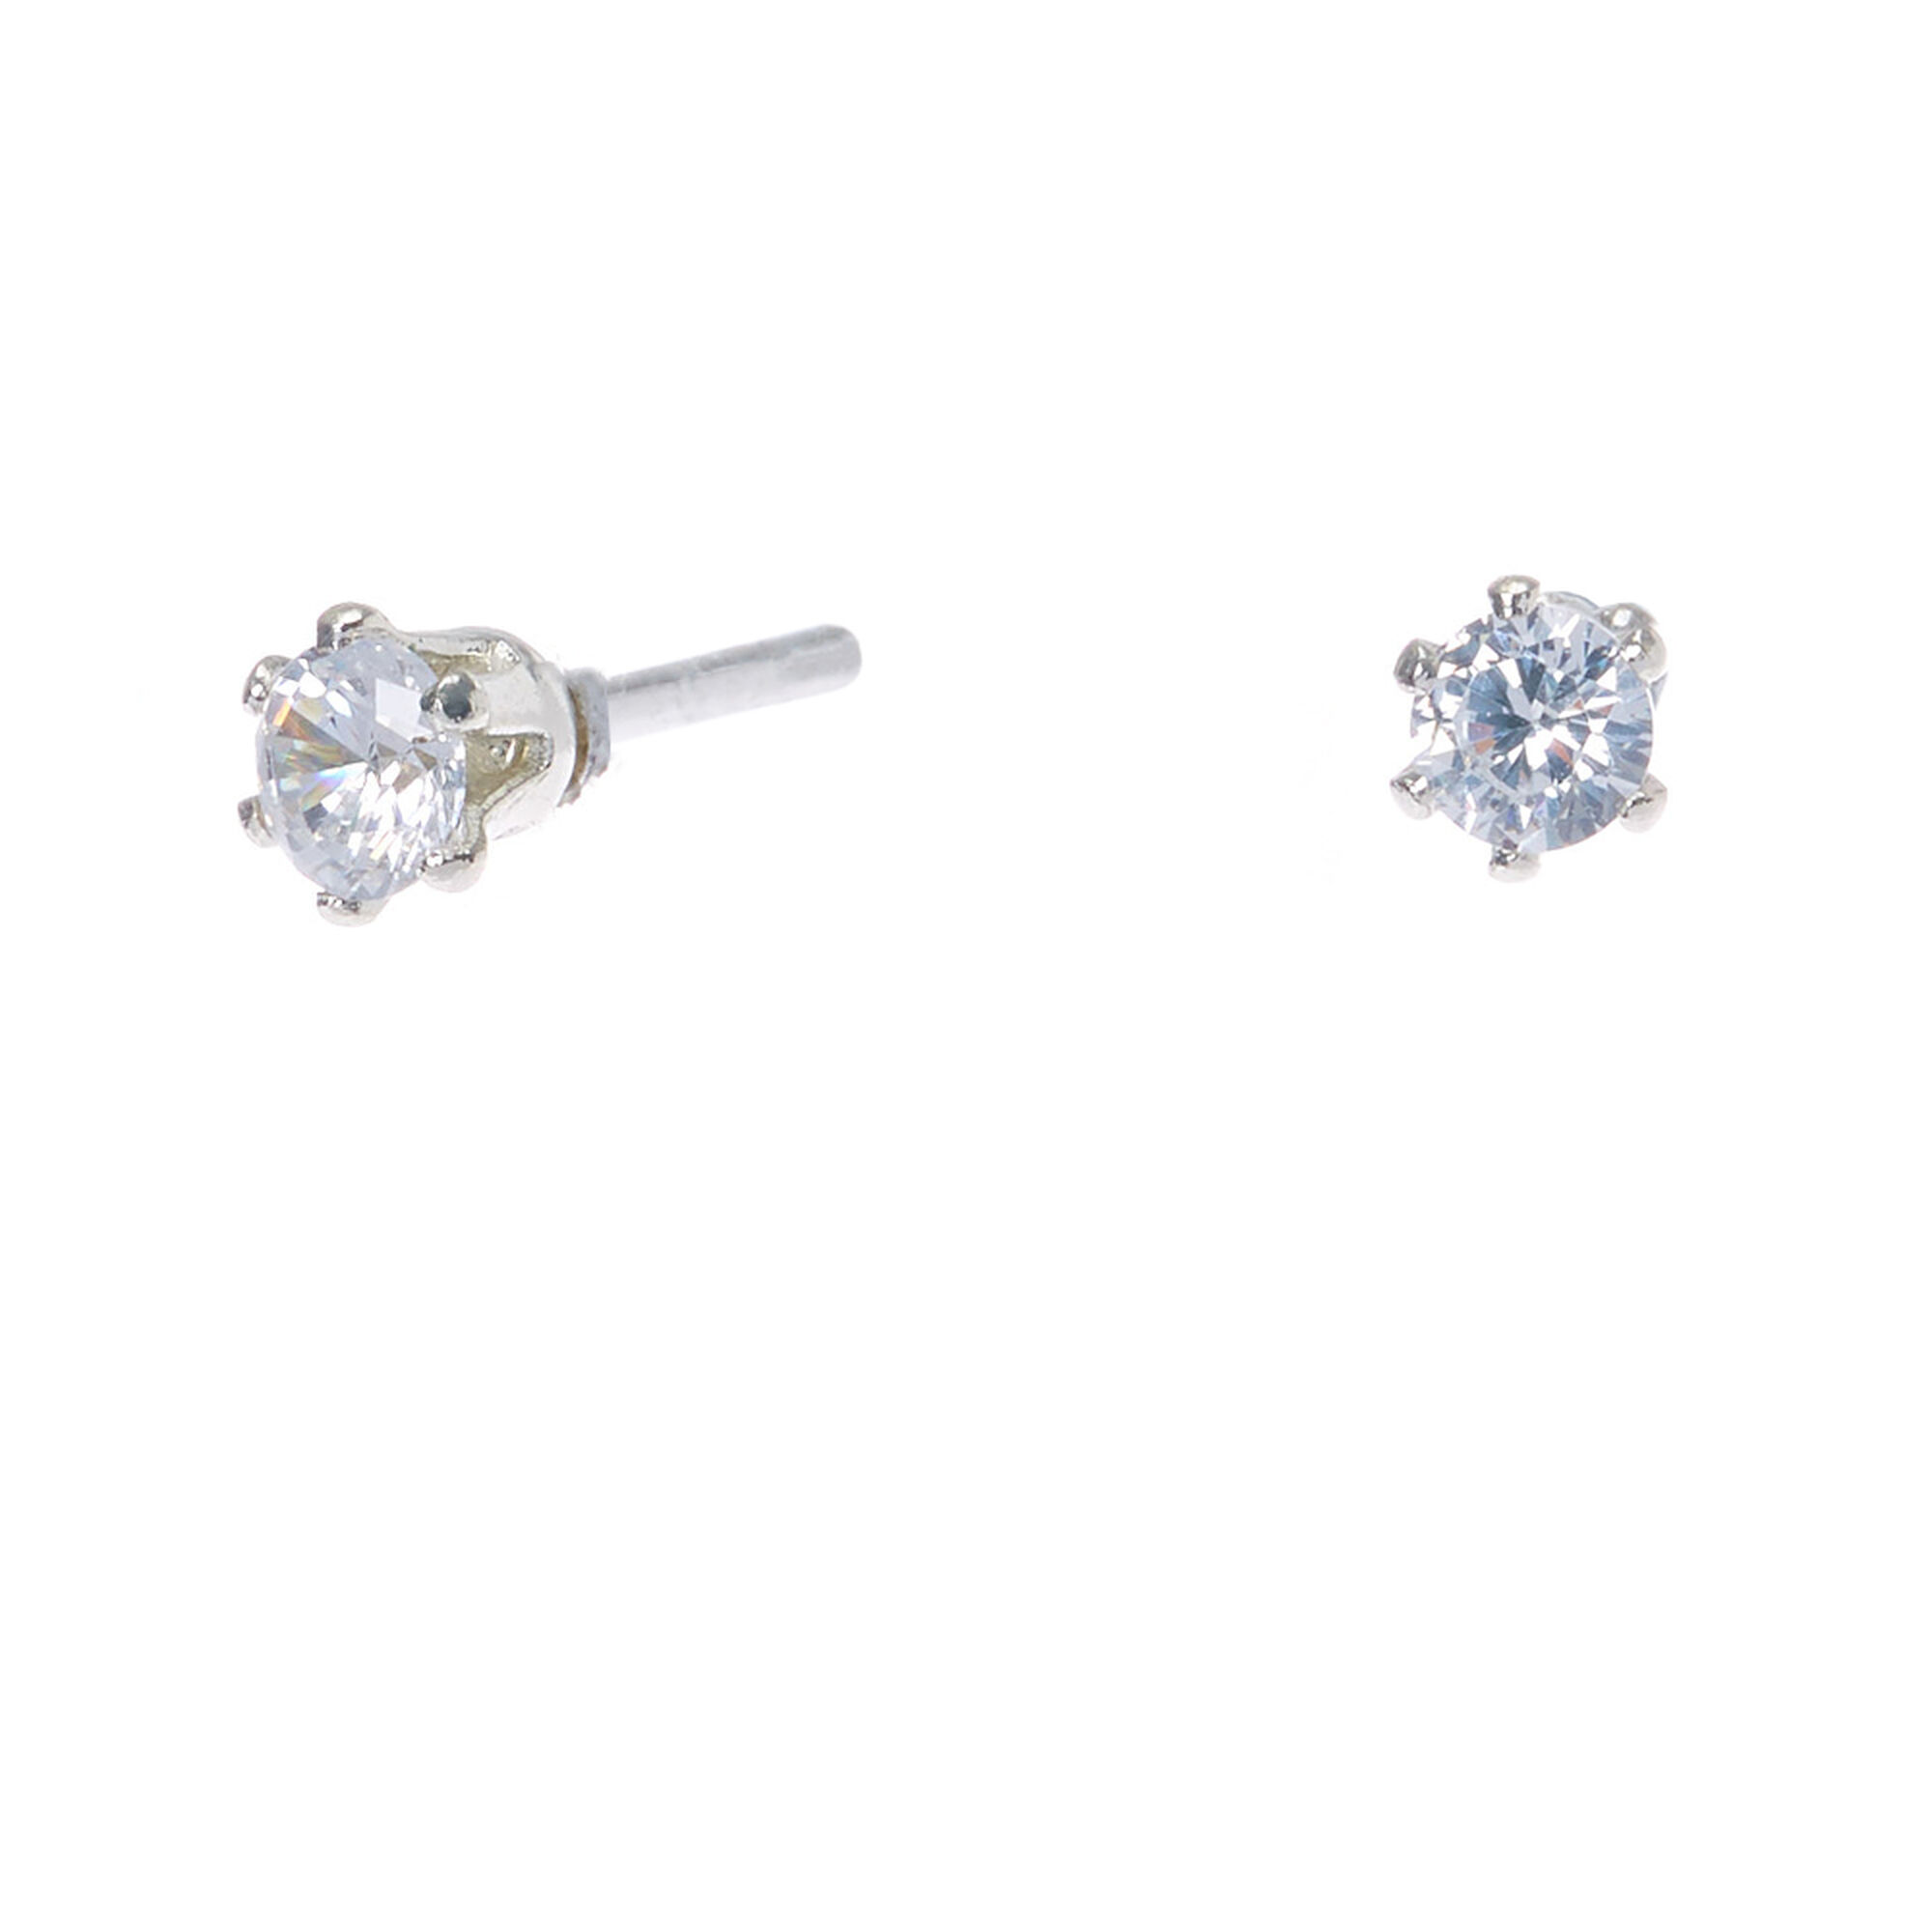 View Claires Tone Cubic Zirconia Round Stud Earrings 3MM Silver information